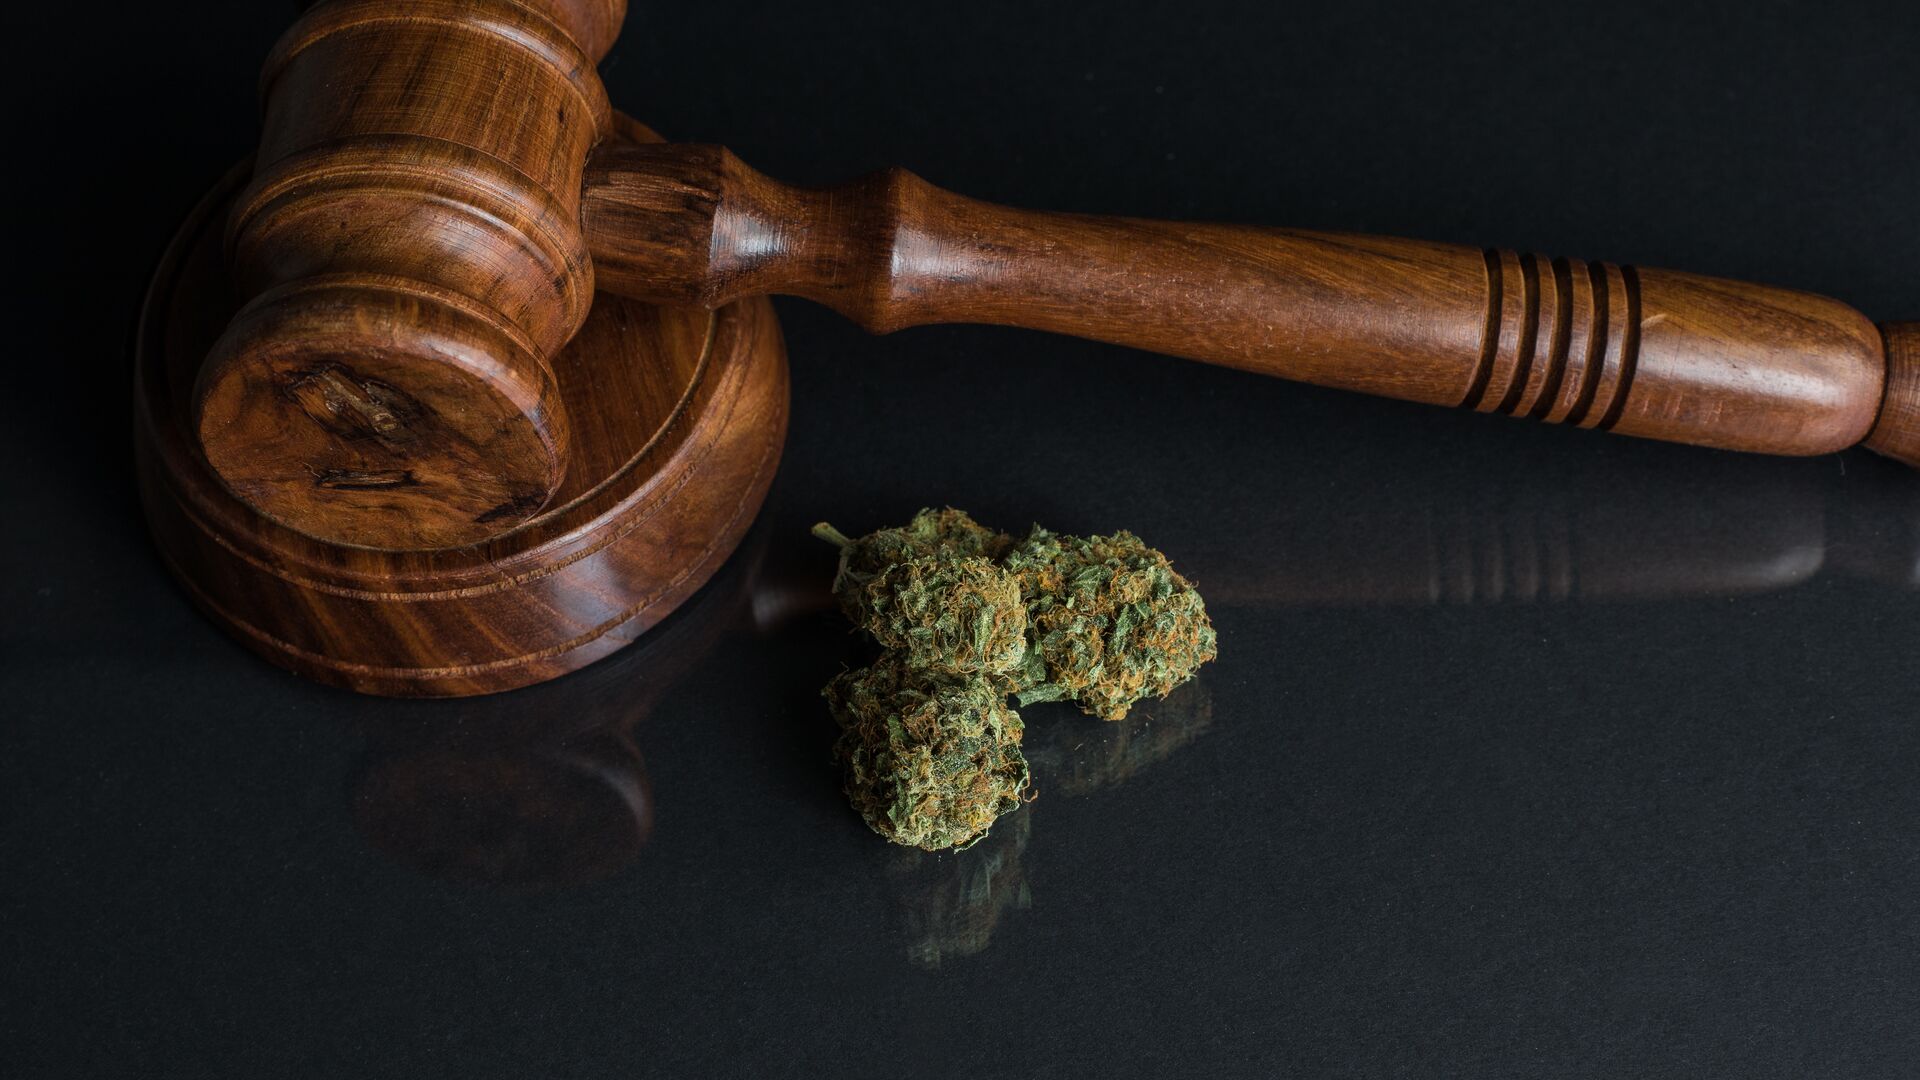 In the 4th episode of The Growth Chamber, Mary Bailey MD of the Last Prisoner Project discusses success stories & cannabis industry partners and their mission. The image is of a gavel and marijuana buds. Representative of the legal injustice perpetrated on cannabis users across the United States. Last Prisoner Project vows to correct this injustice.